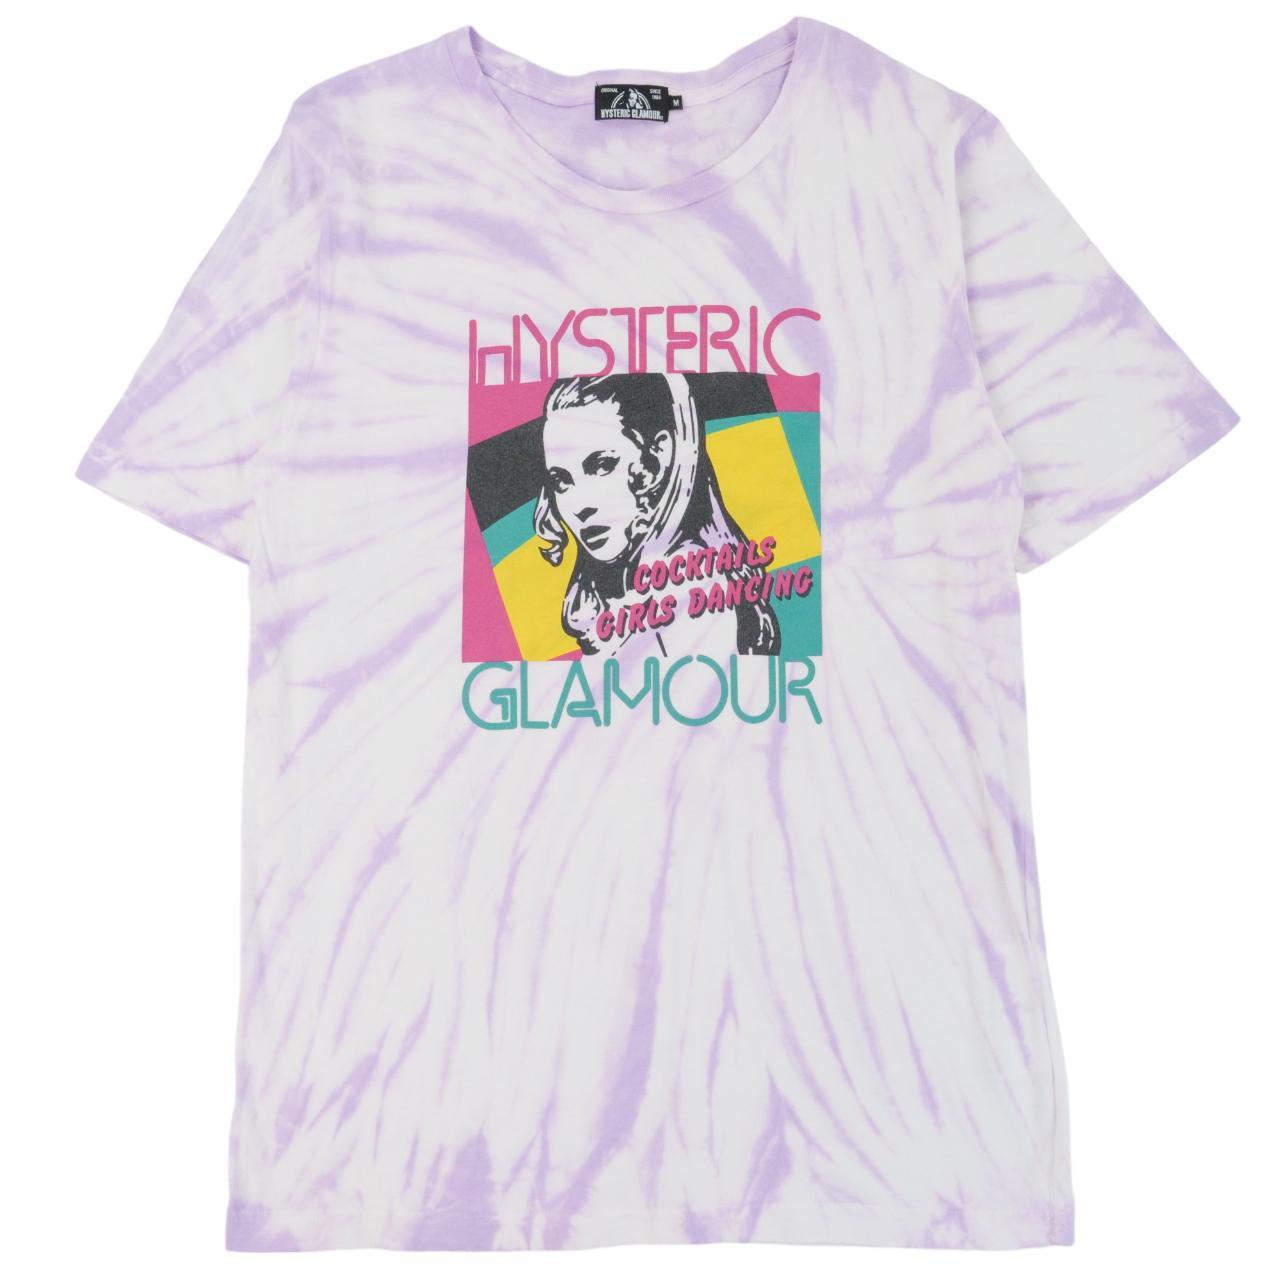 Vintage Hysteric Glamour Graphic Tie Dye T Shirt Size M - second